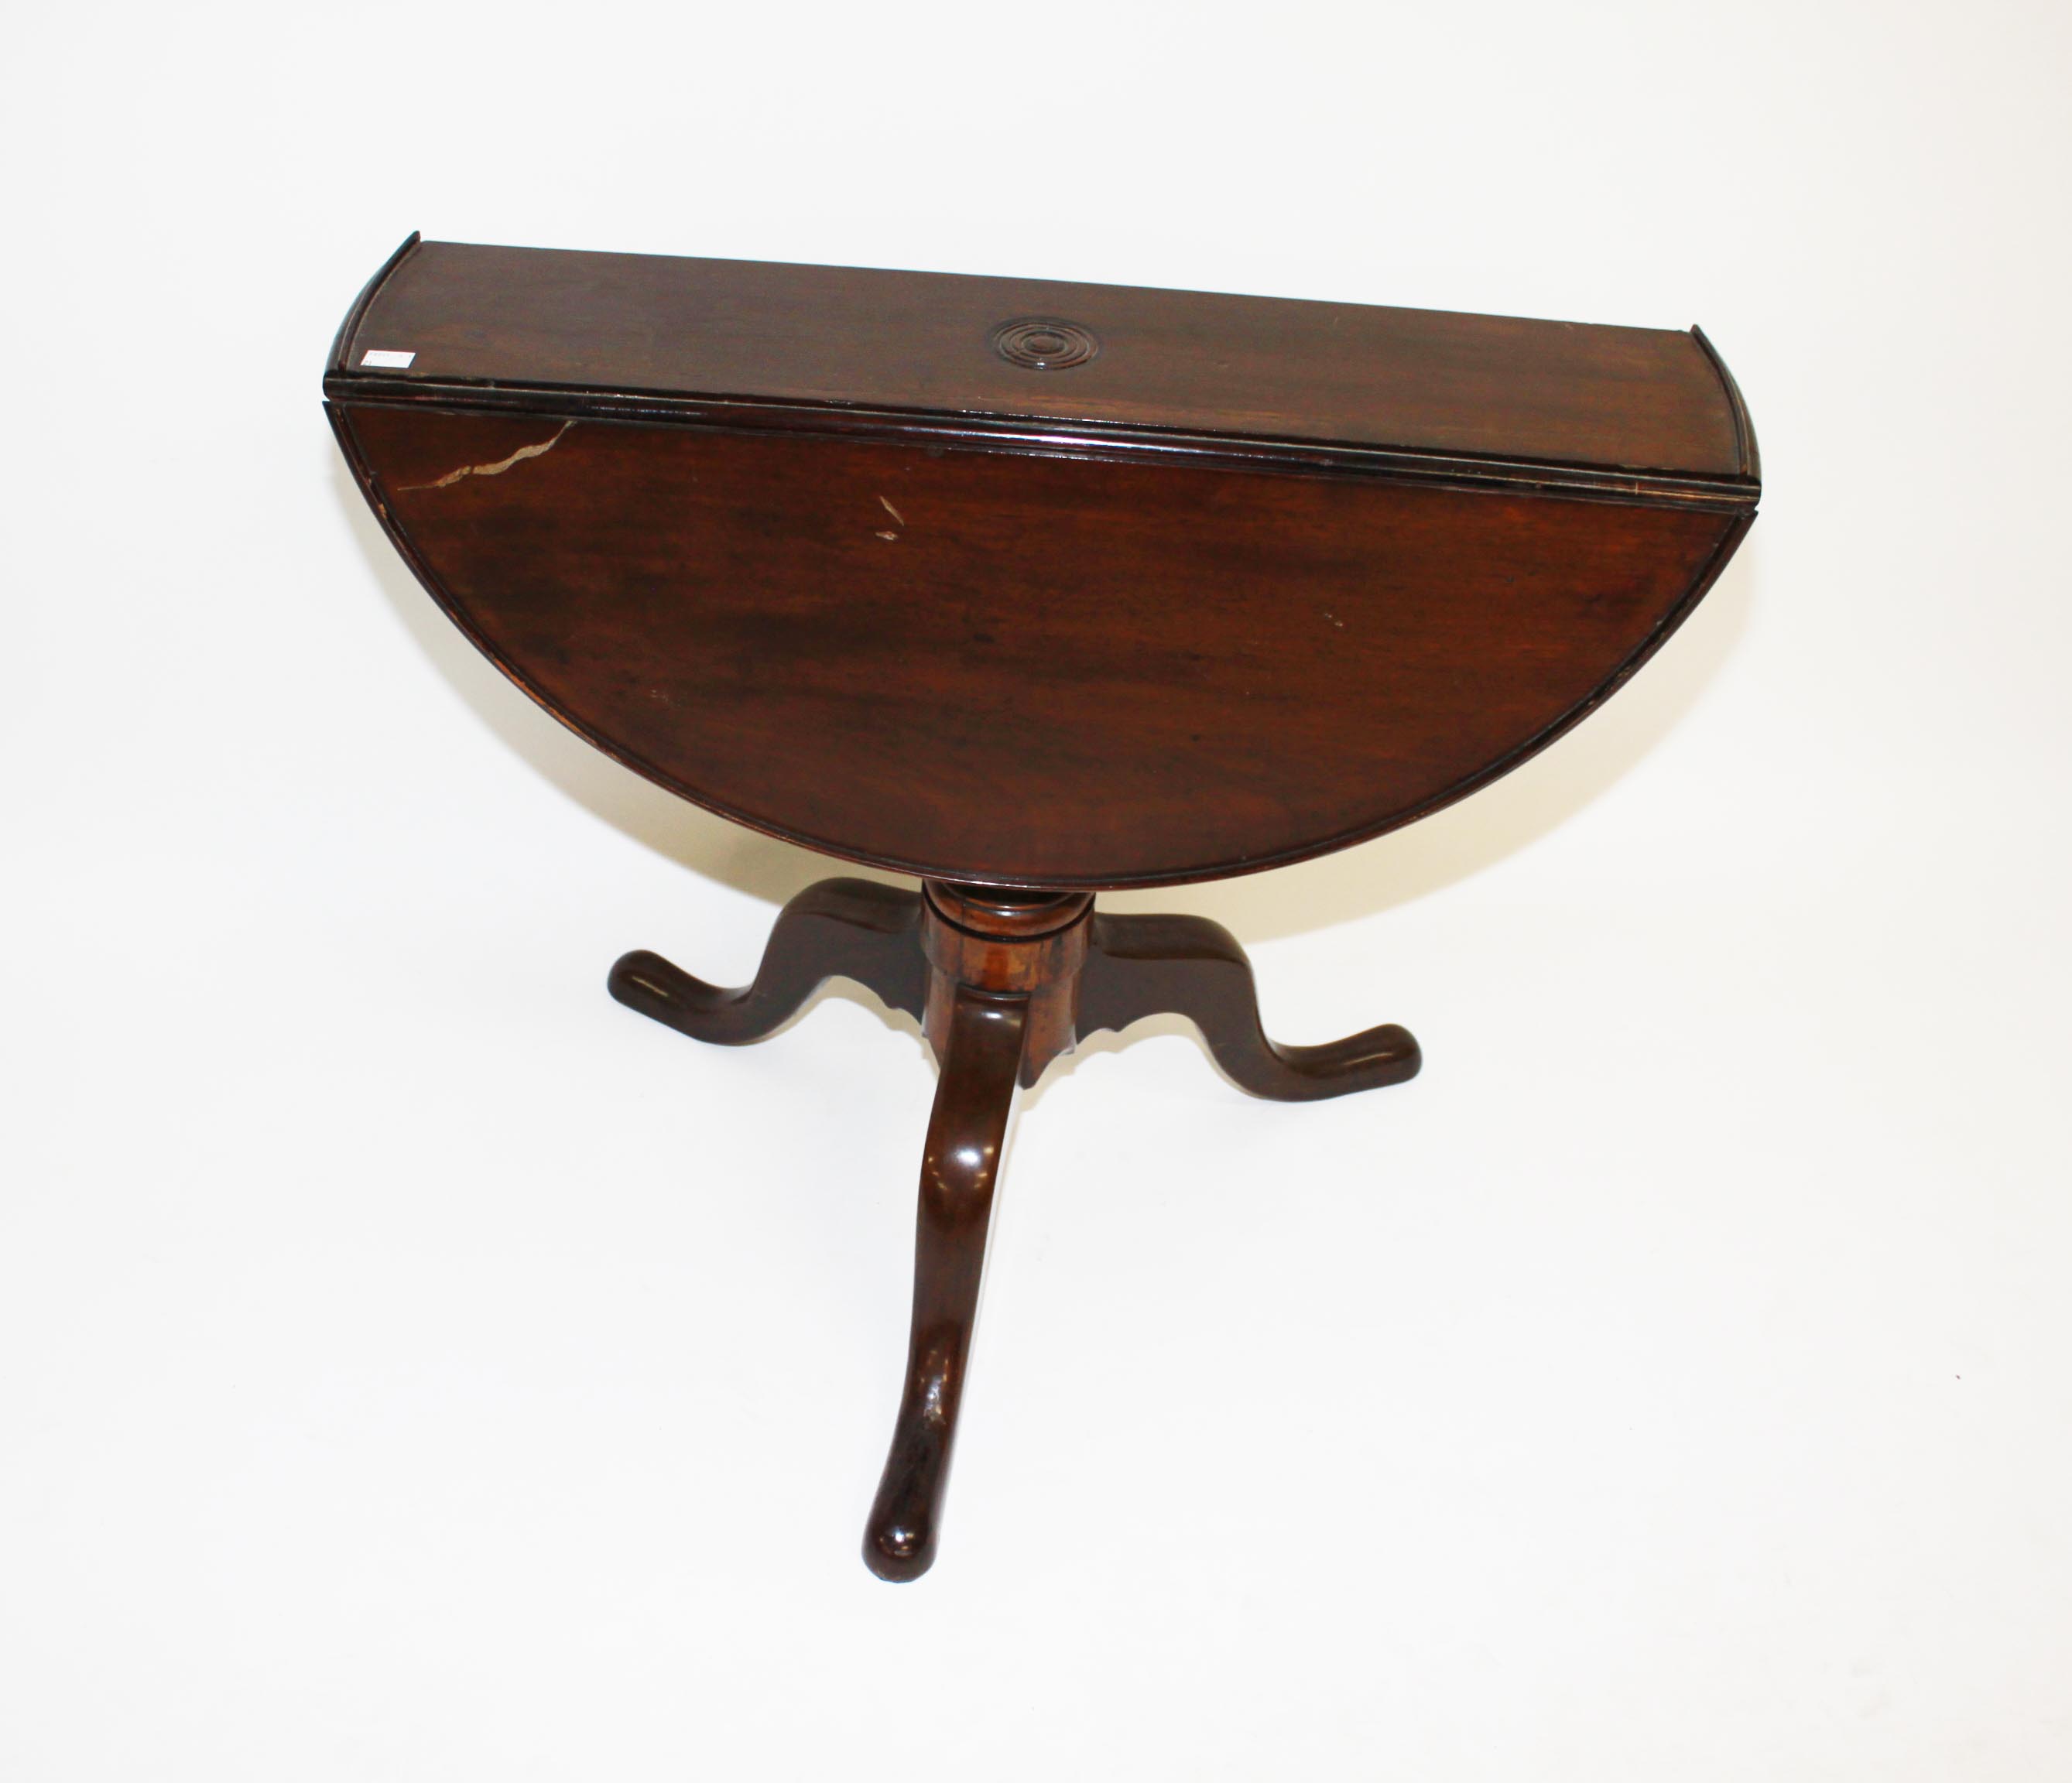 A MAHOGANY DROPLEAF TABLE, 
19th century, with demilune flaps, on a baluster turned stem, on